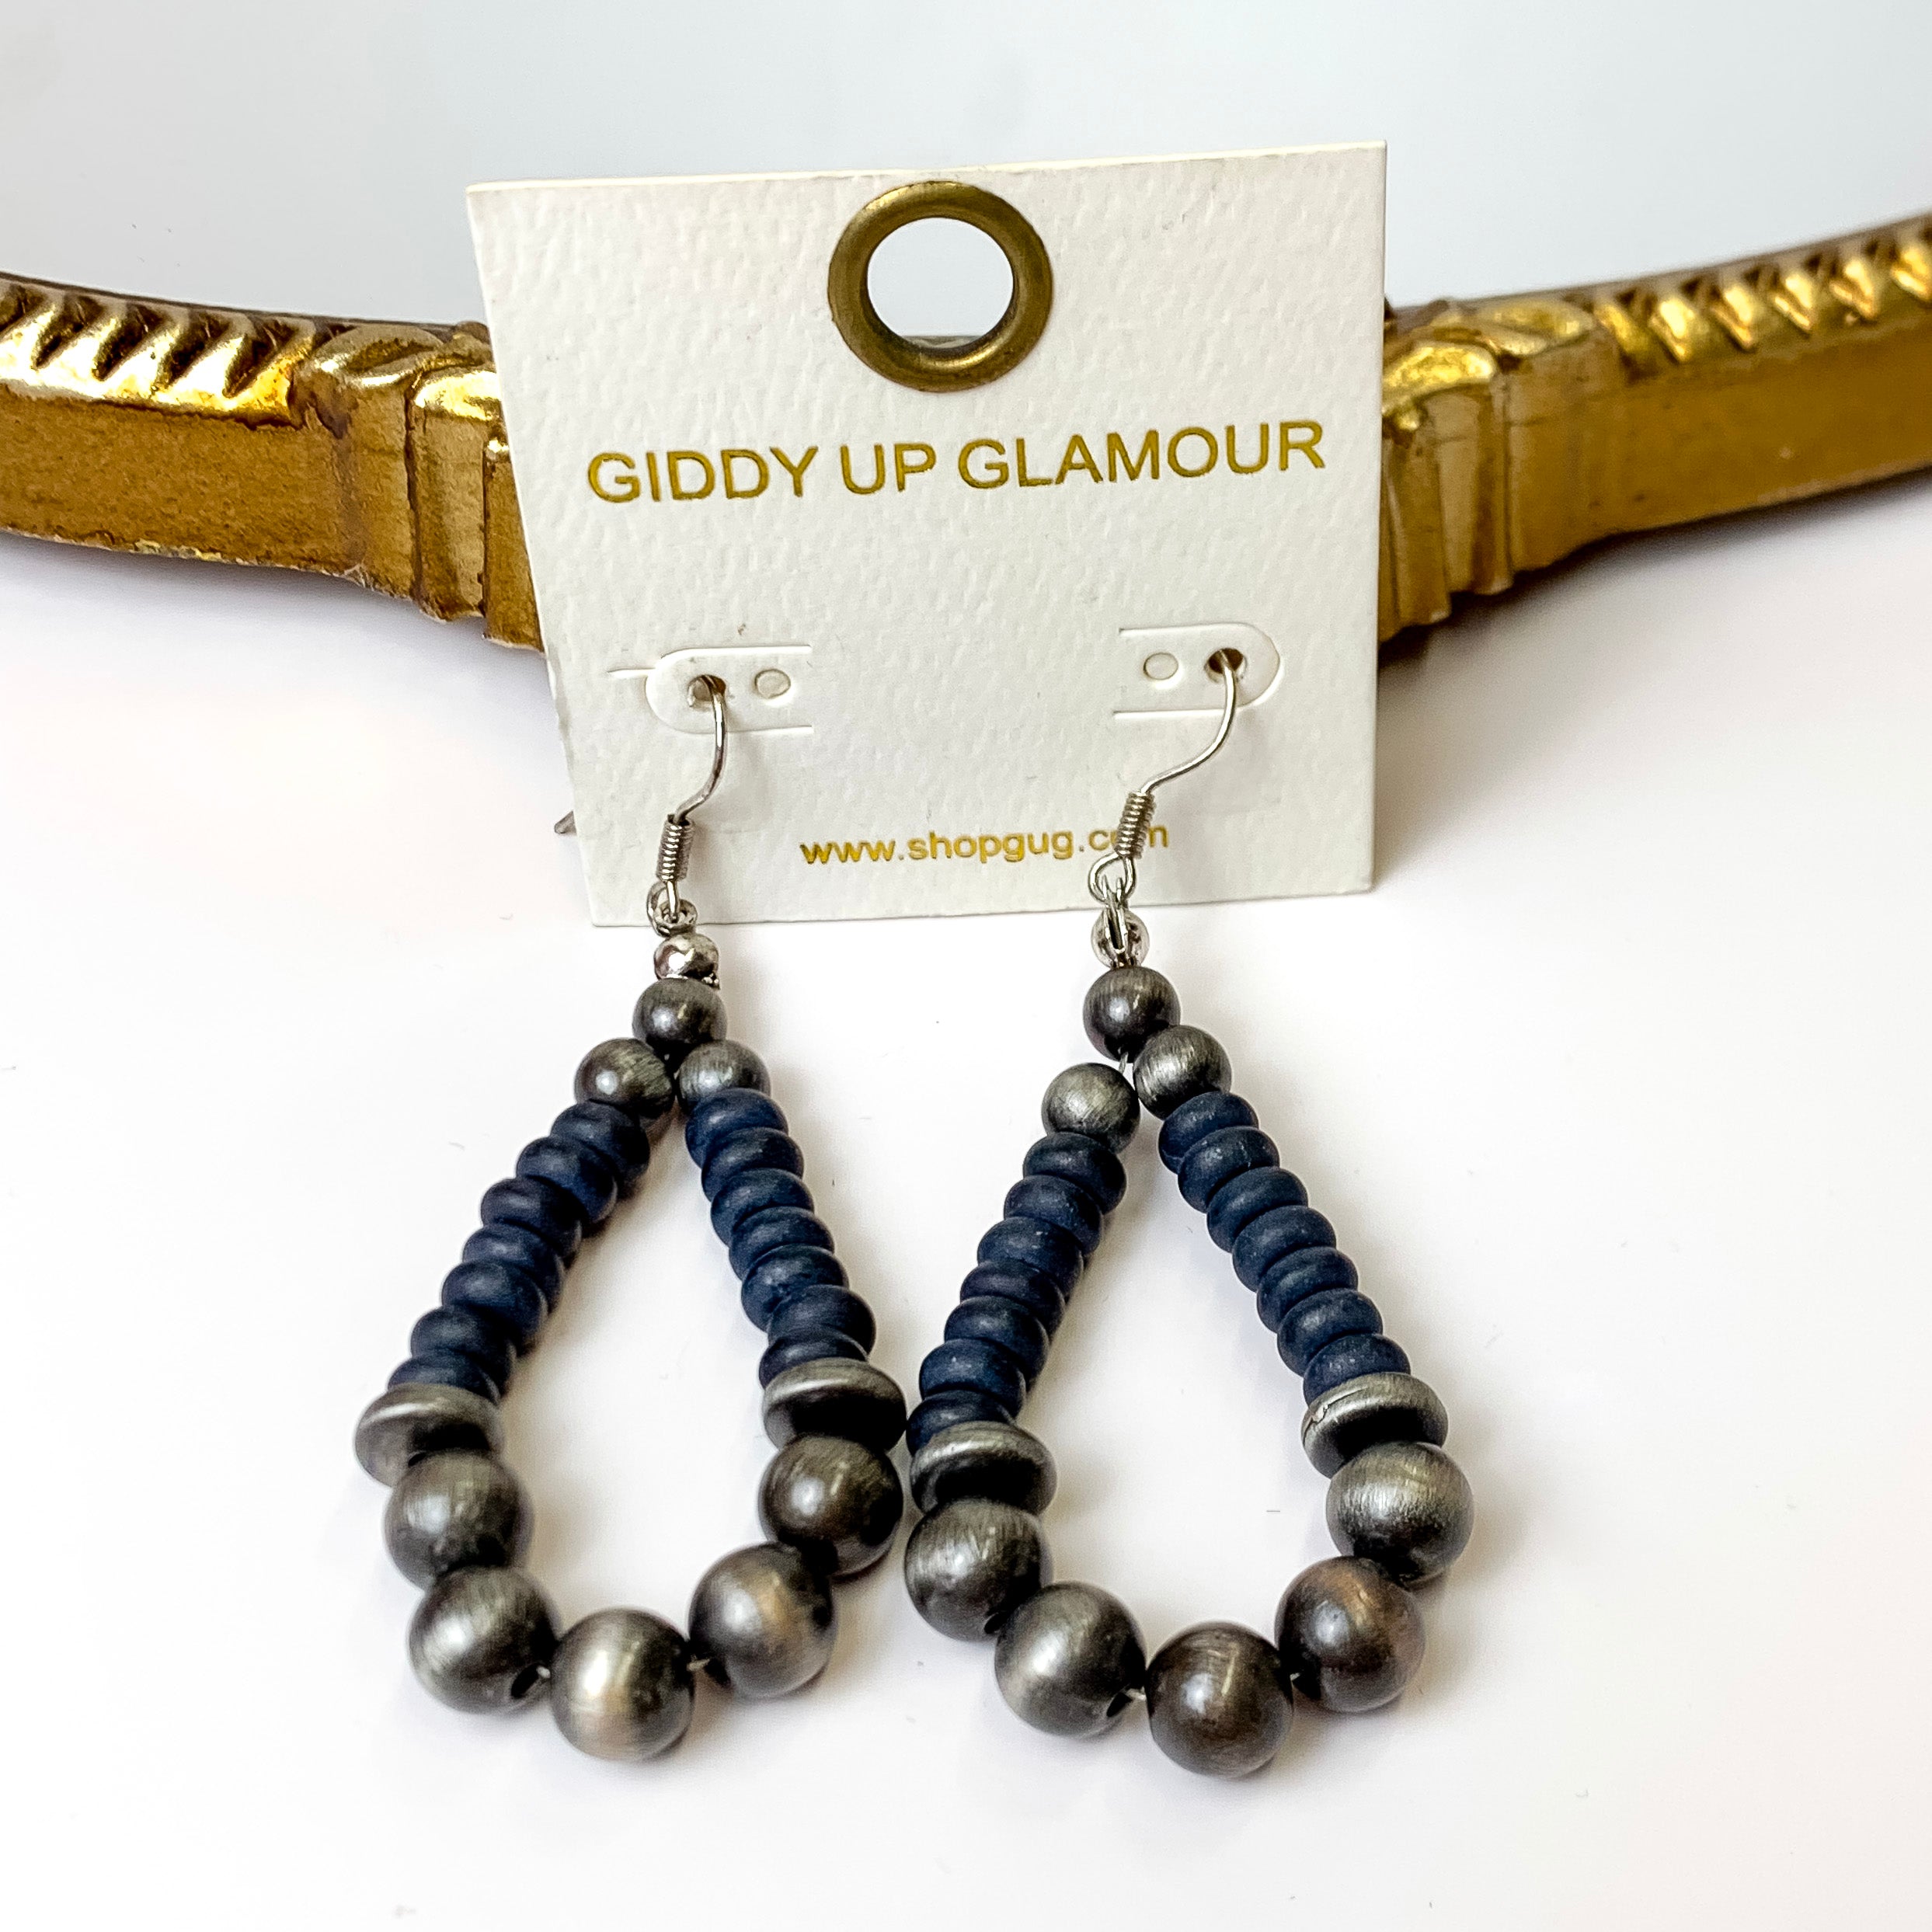 Faux Navajo Teardrop Beaded Earrings in Silver Tone and Navy Blue - Giddy Up Glamour Boutique